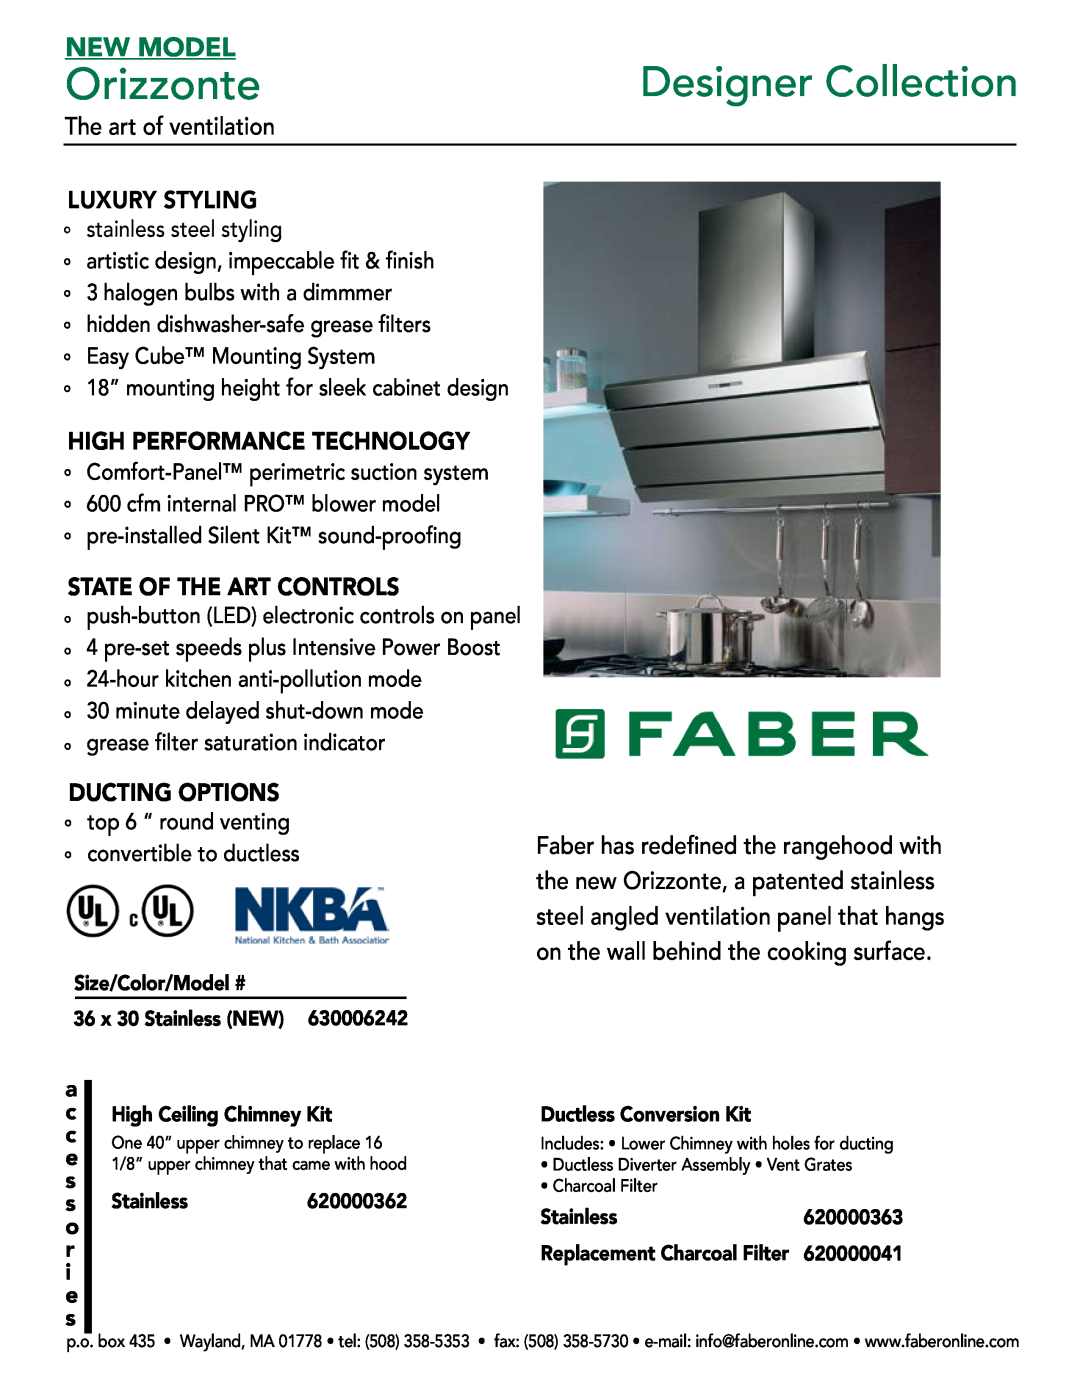 Faber 620000362 manual Luxury Styling, High Performance Technology, State Of The Art Controls, Ducting Options, Orizzonte 